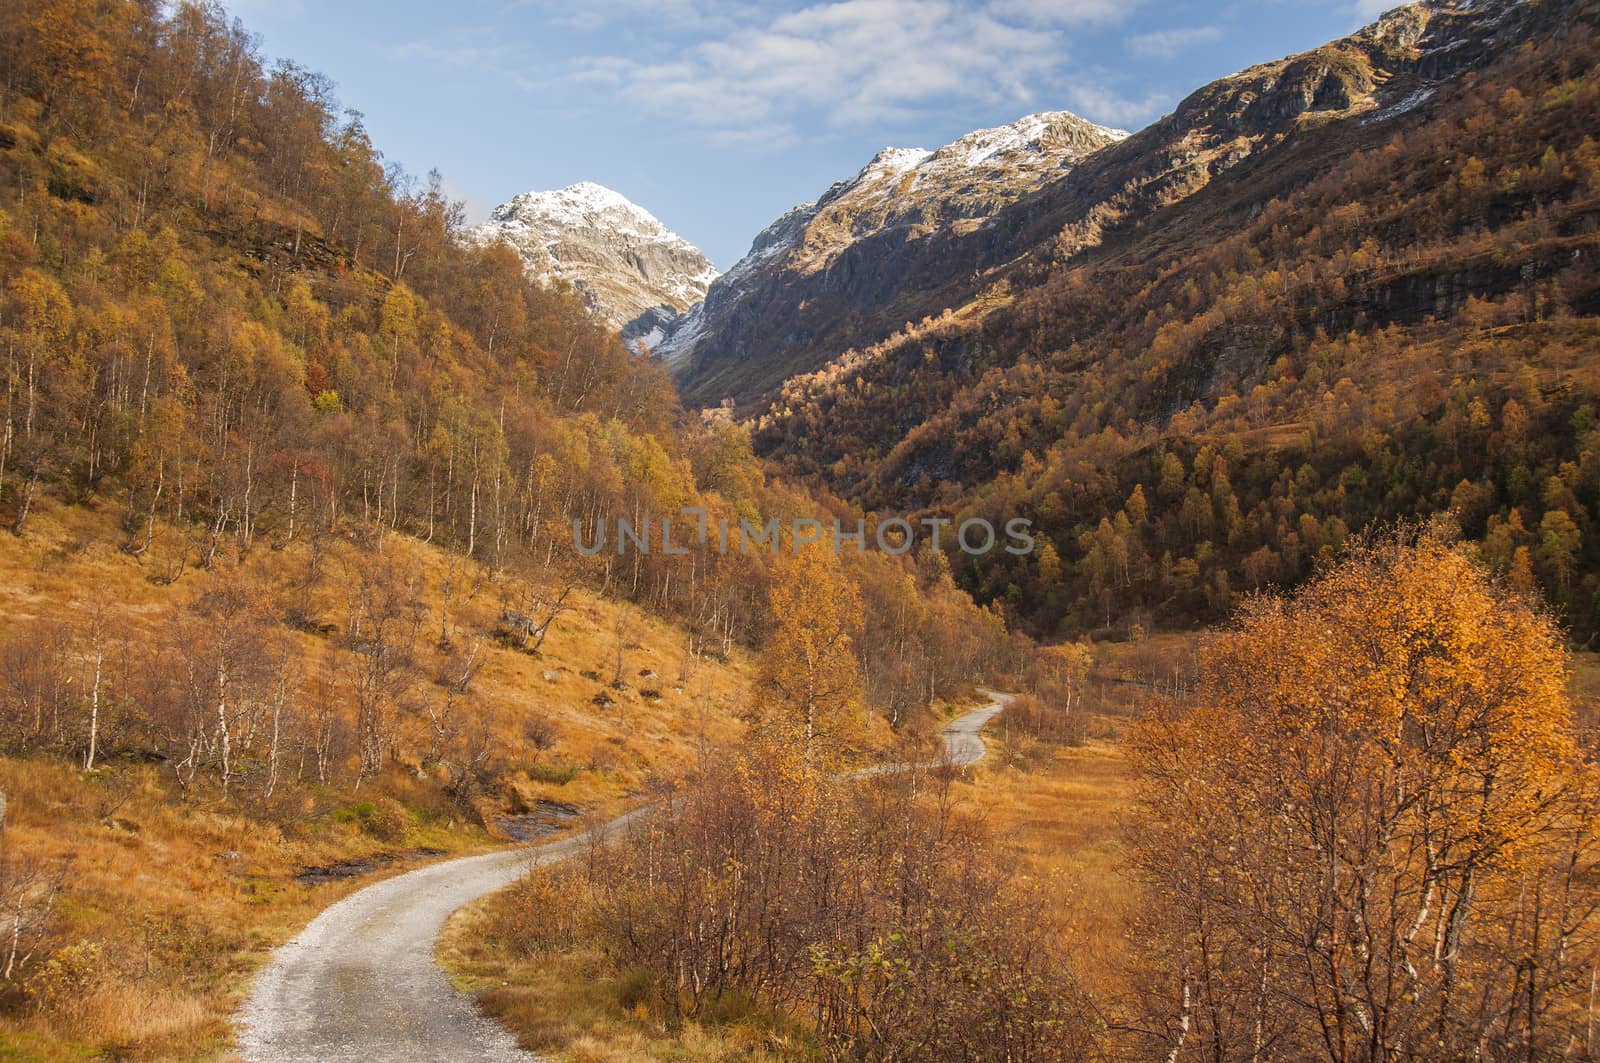 A winding mountain road in autumn